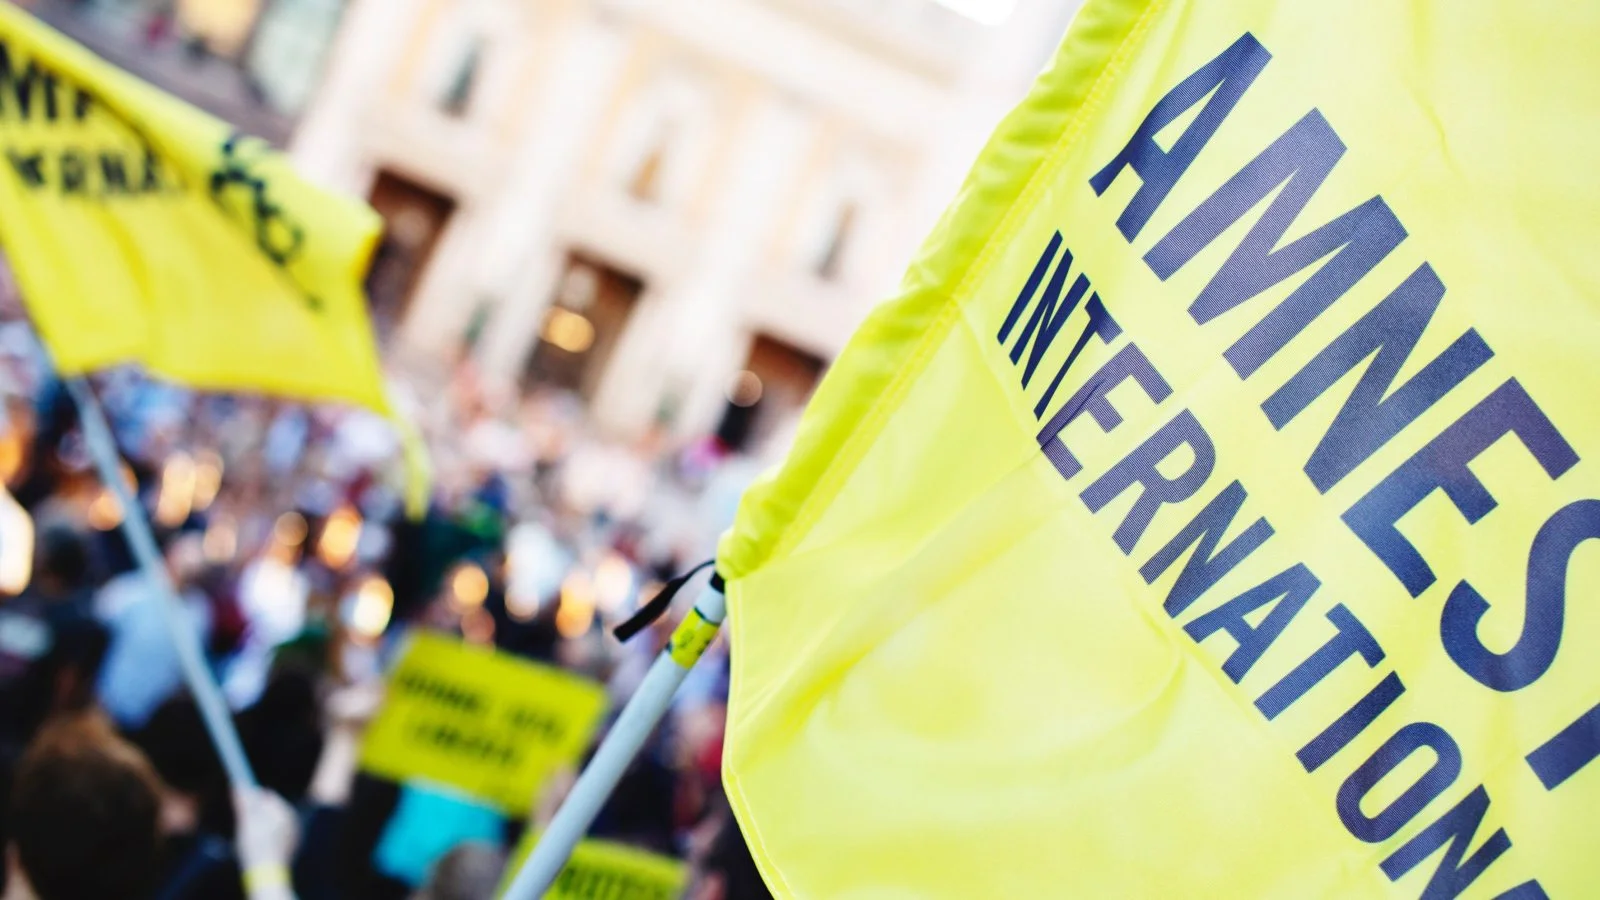 A close up of the Amnesty International flag someone is waving as part of a protest.